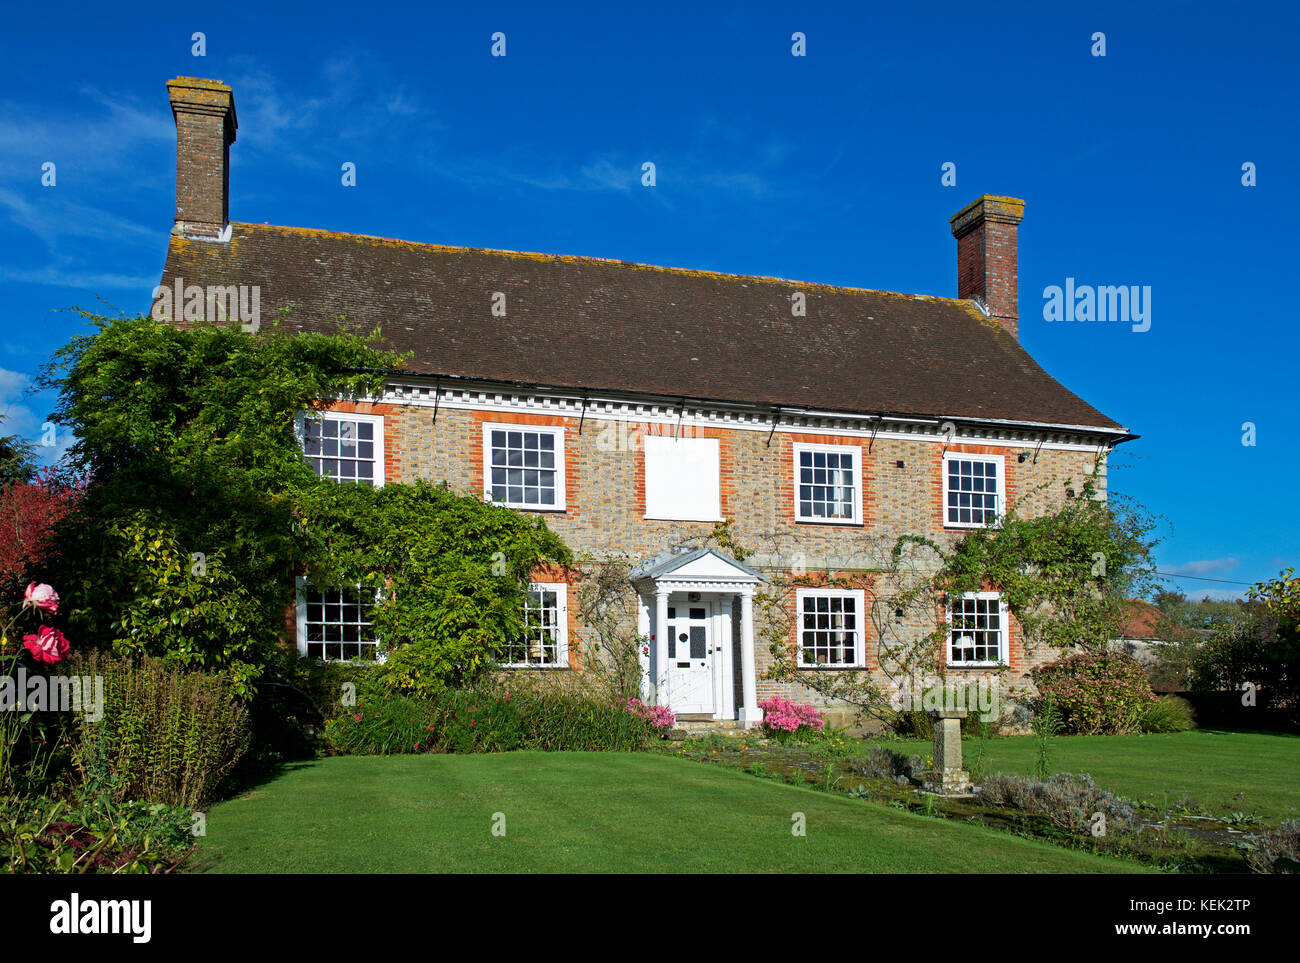 Handsome house in the village of Fletching, East Sussex, England UK Stock Photo